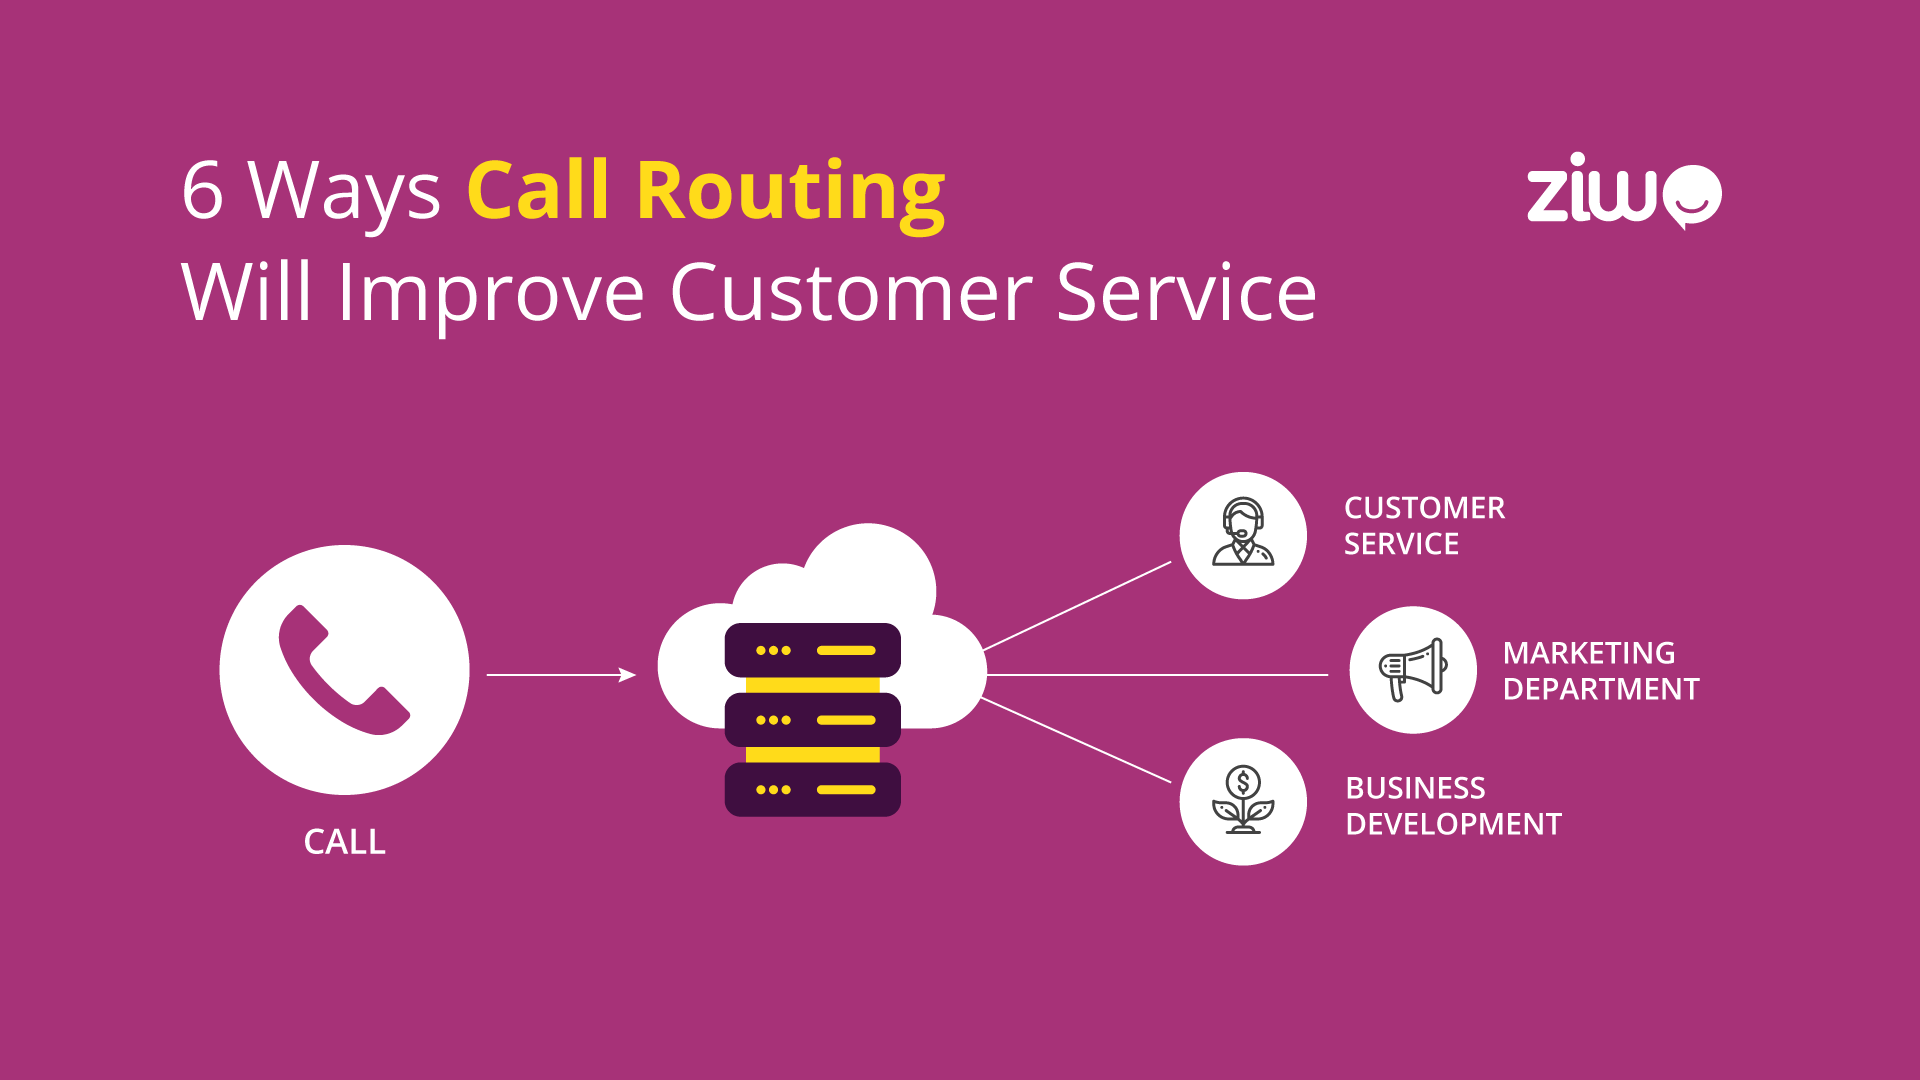 6 ways call routing will improves customer service